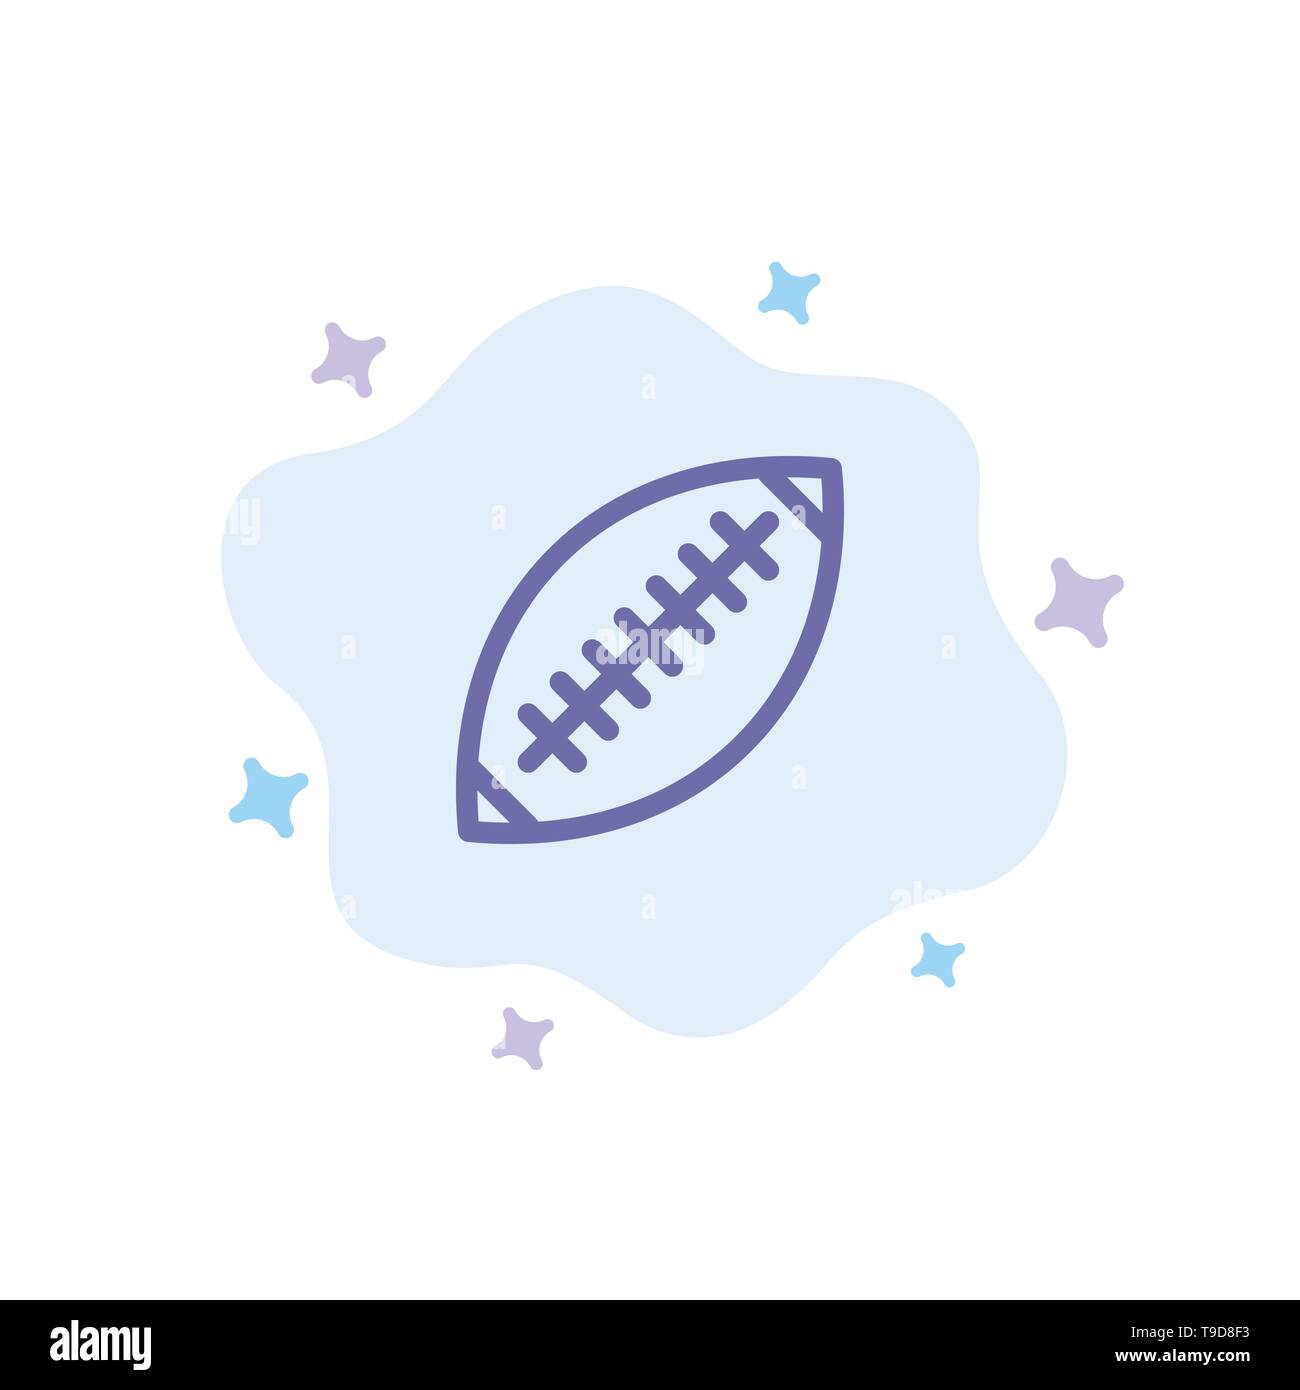 Afl, Australia, Football, Rugby, Rugby Ball, Sport, Sydney Blue Icon on Abstract Cloud Background Stock Vector